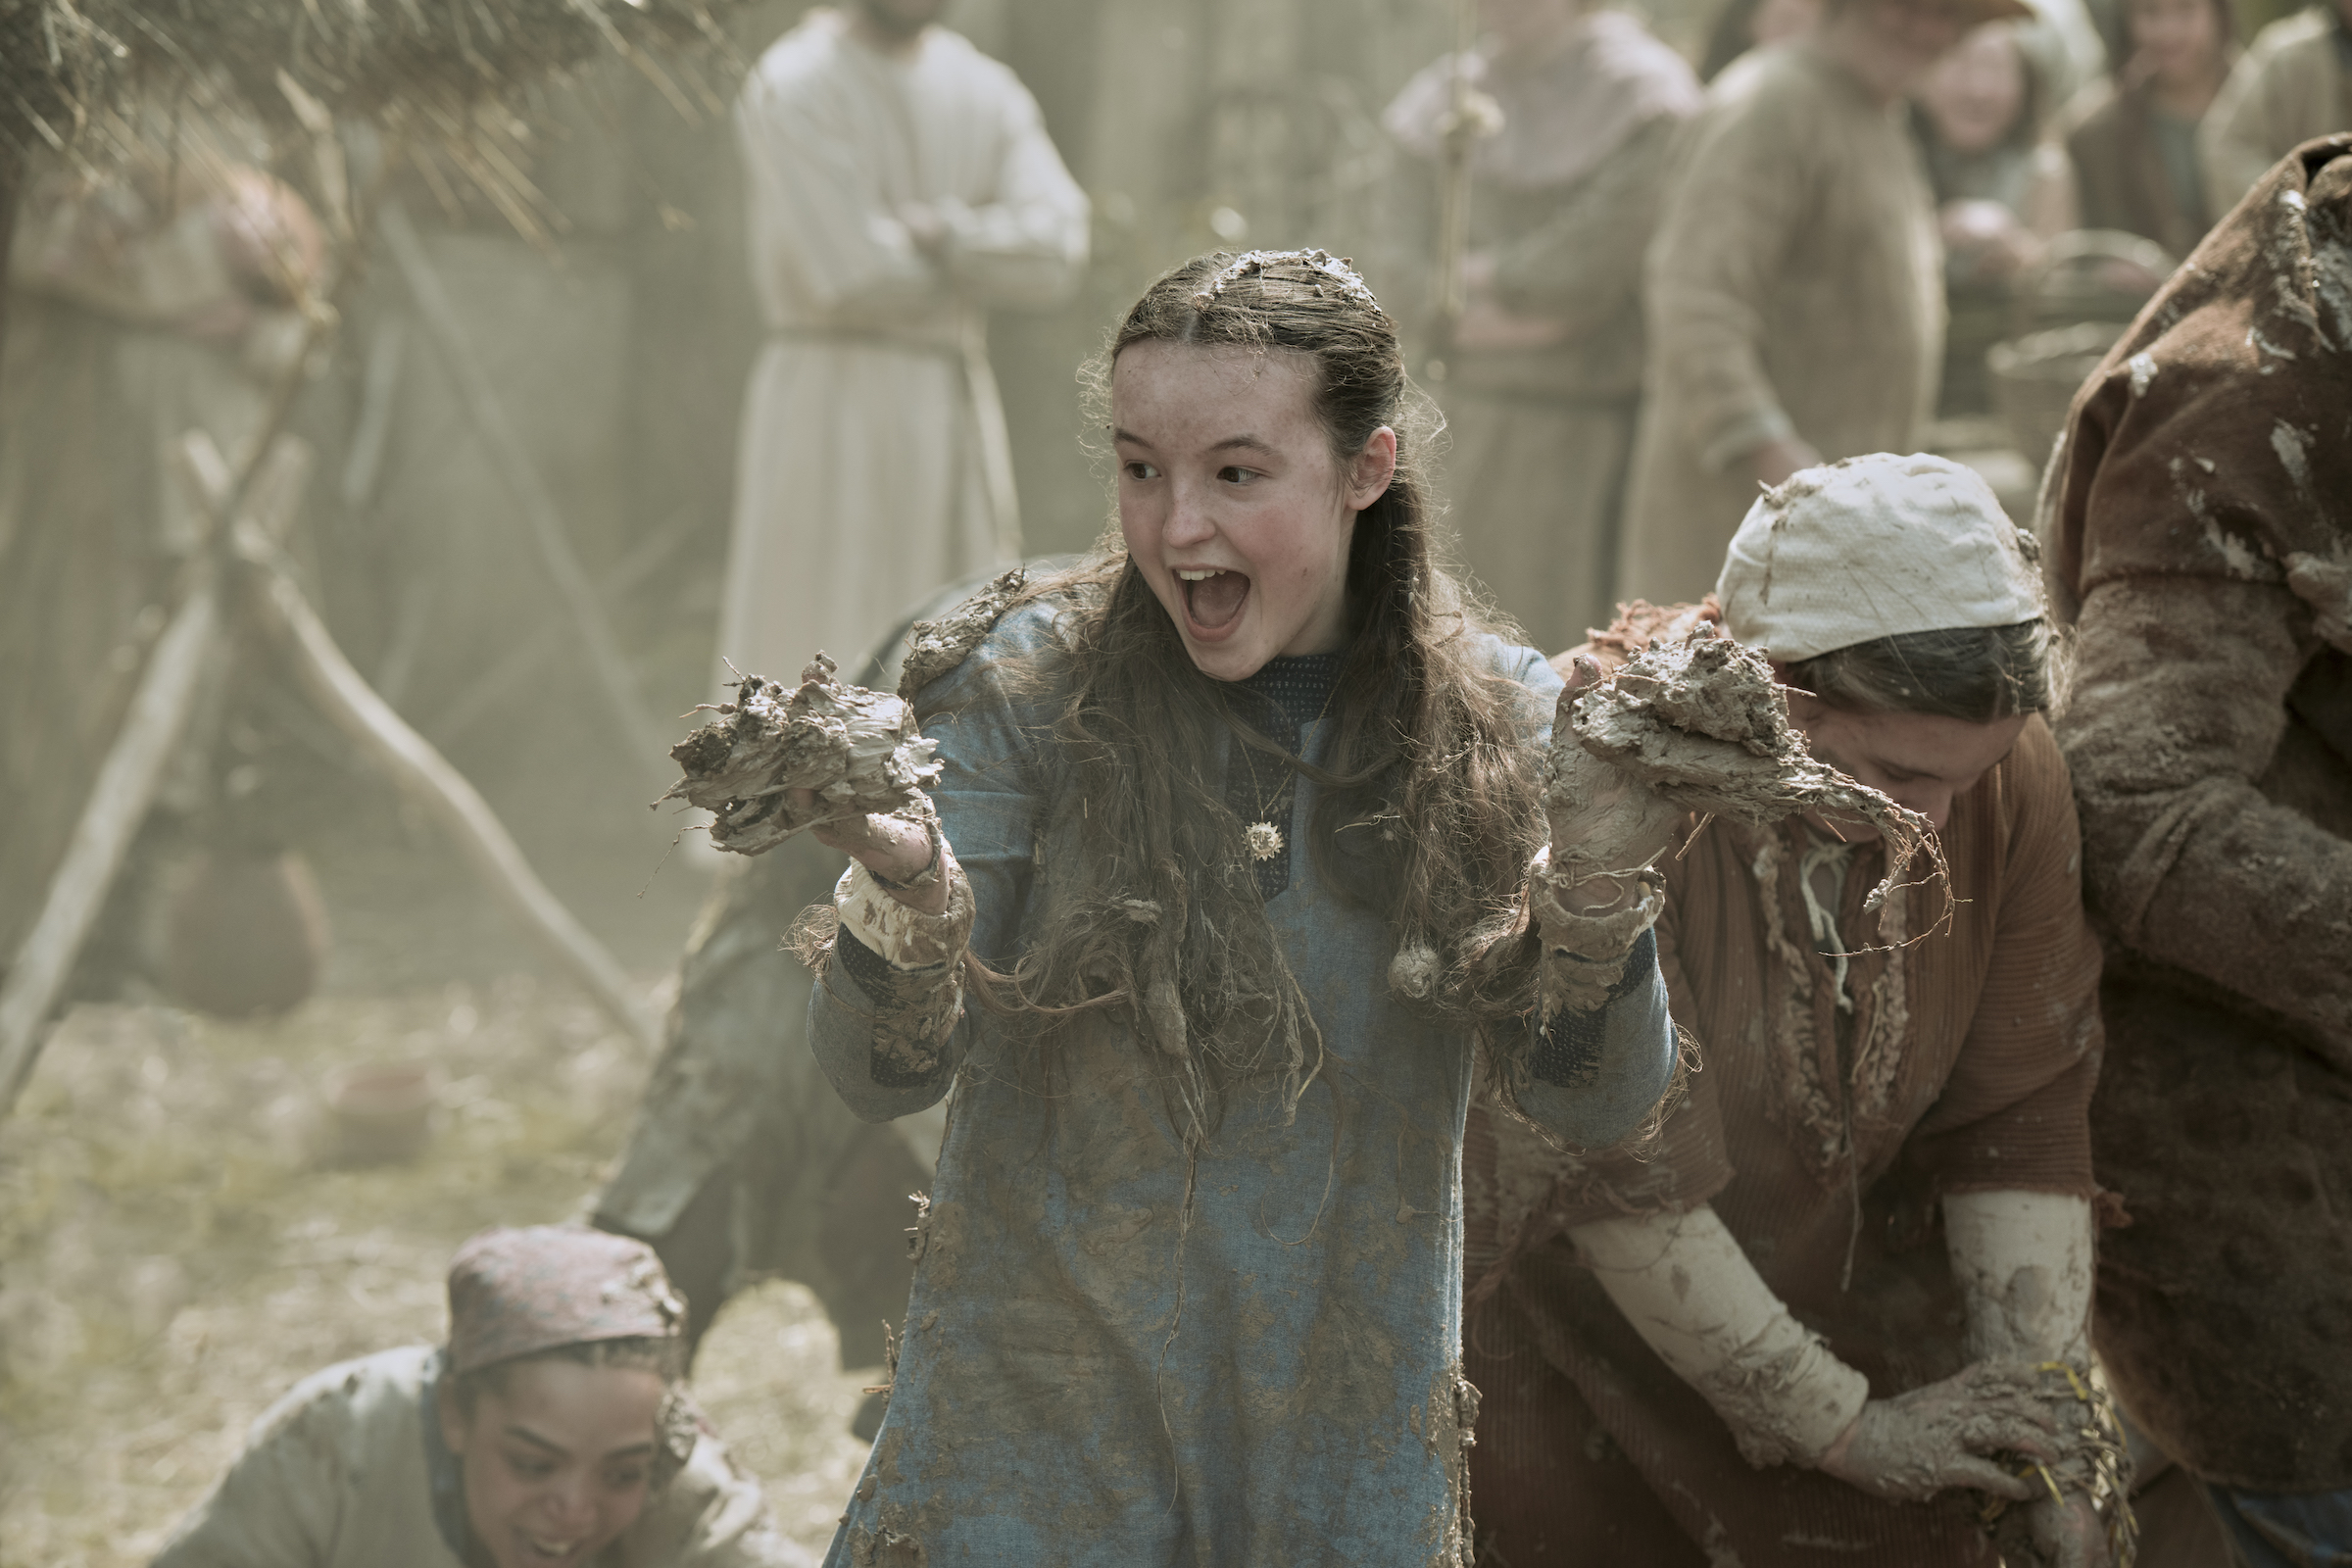 Birdy, in a longsleeve blue dress, grabs fistfuls of mud at a village cottage raising